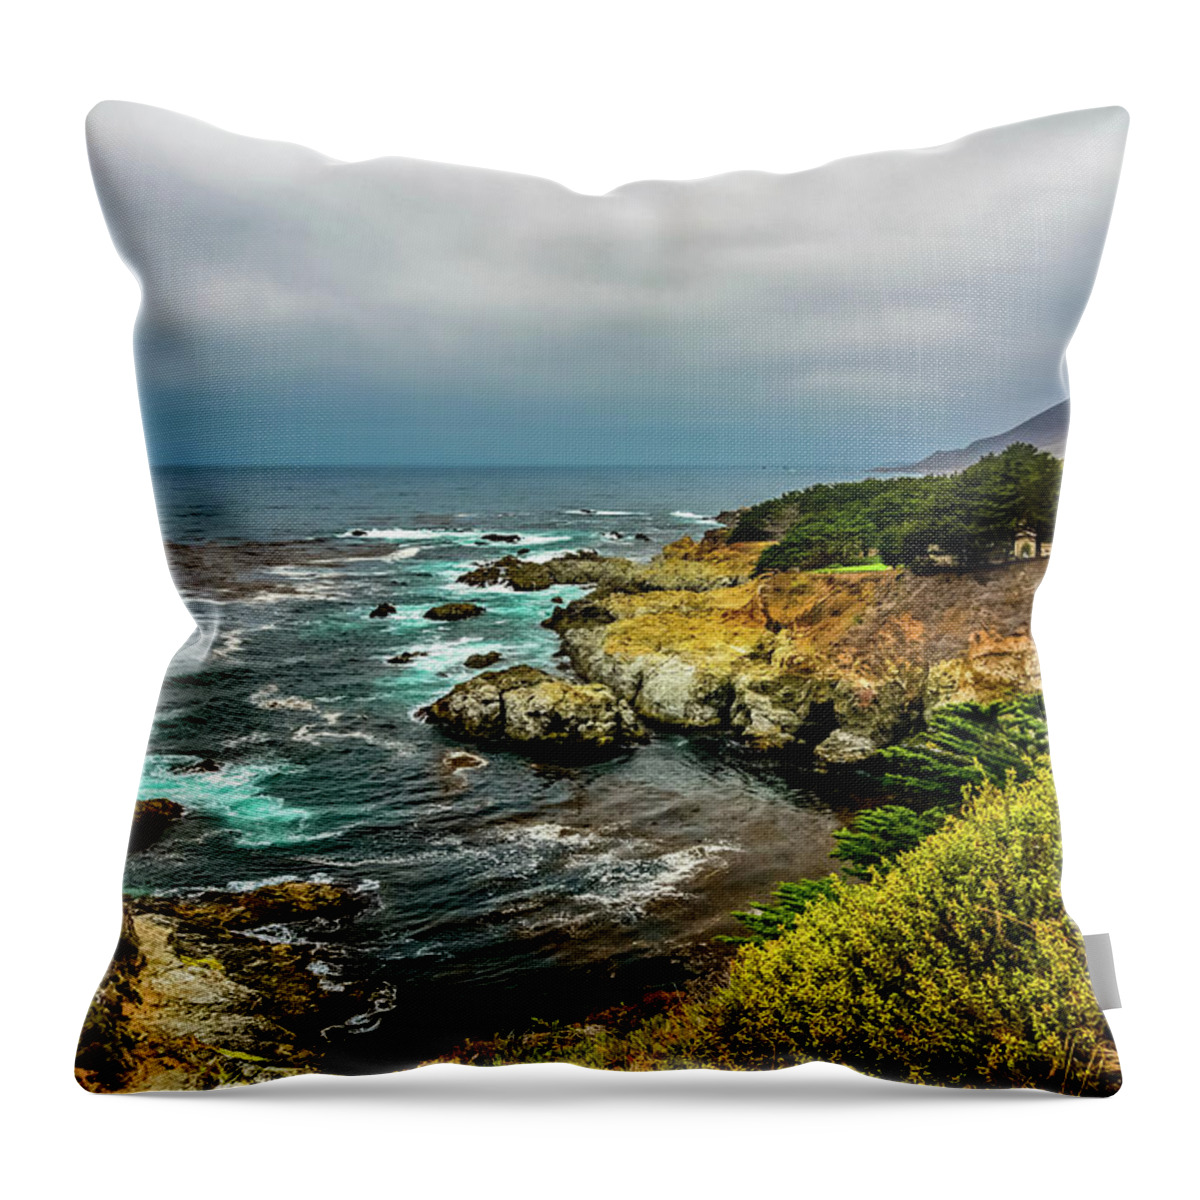 California Central Coast Throw Pillow featuring the photograph Pacific Coast by Deb Beausoleil